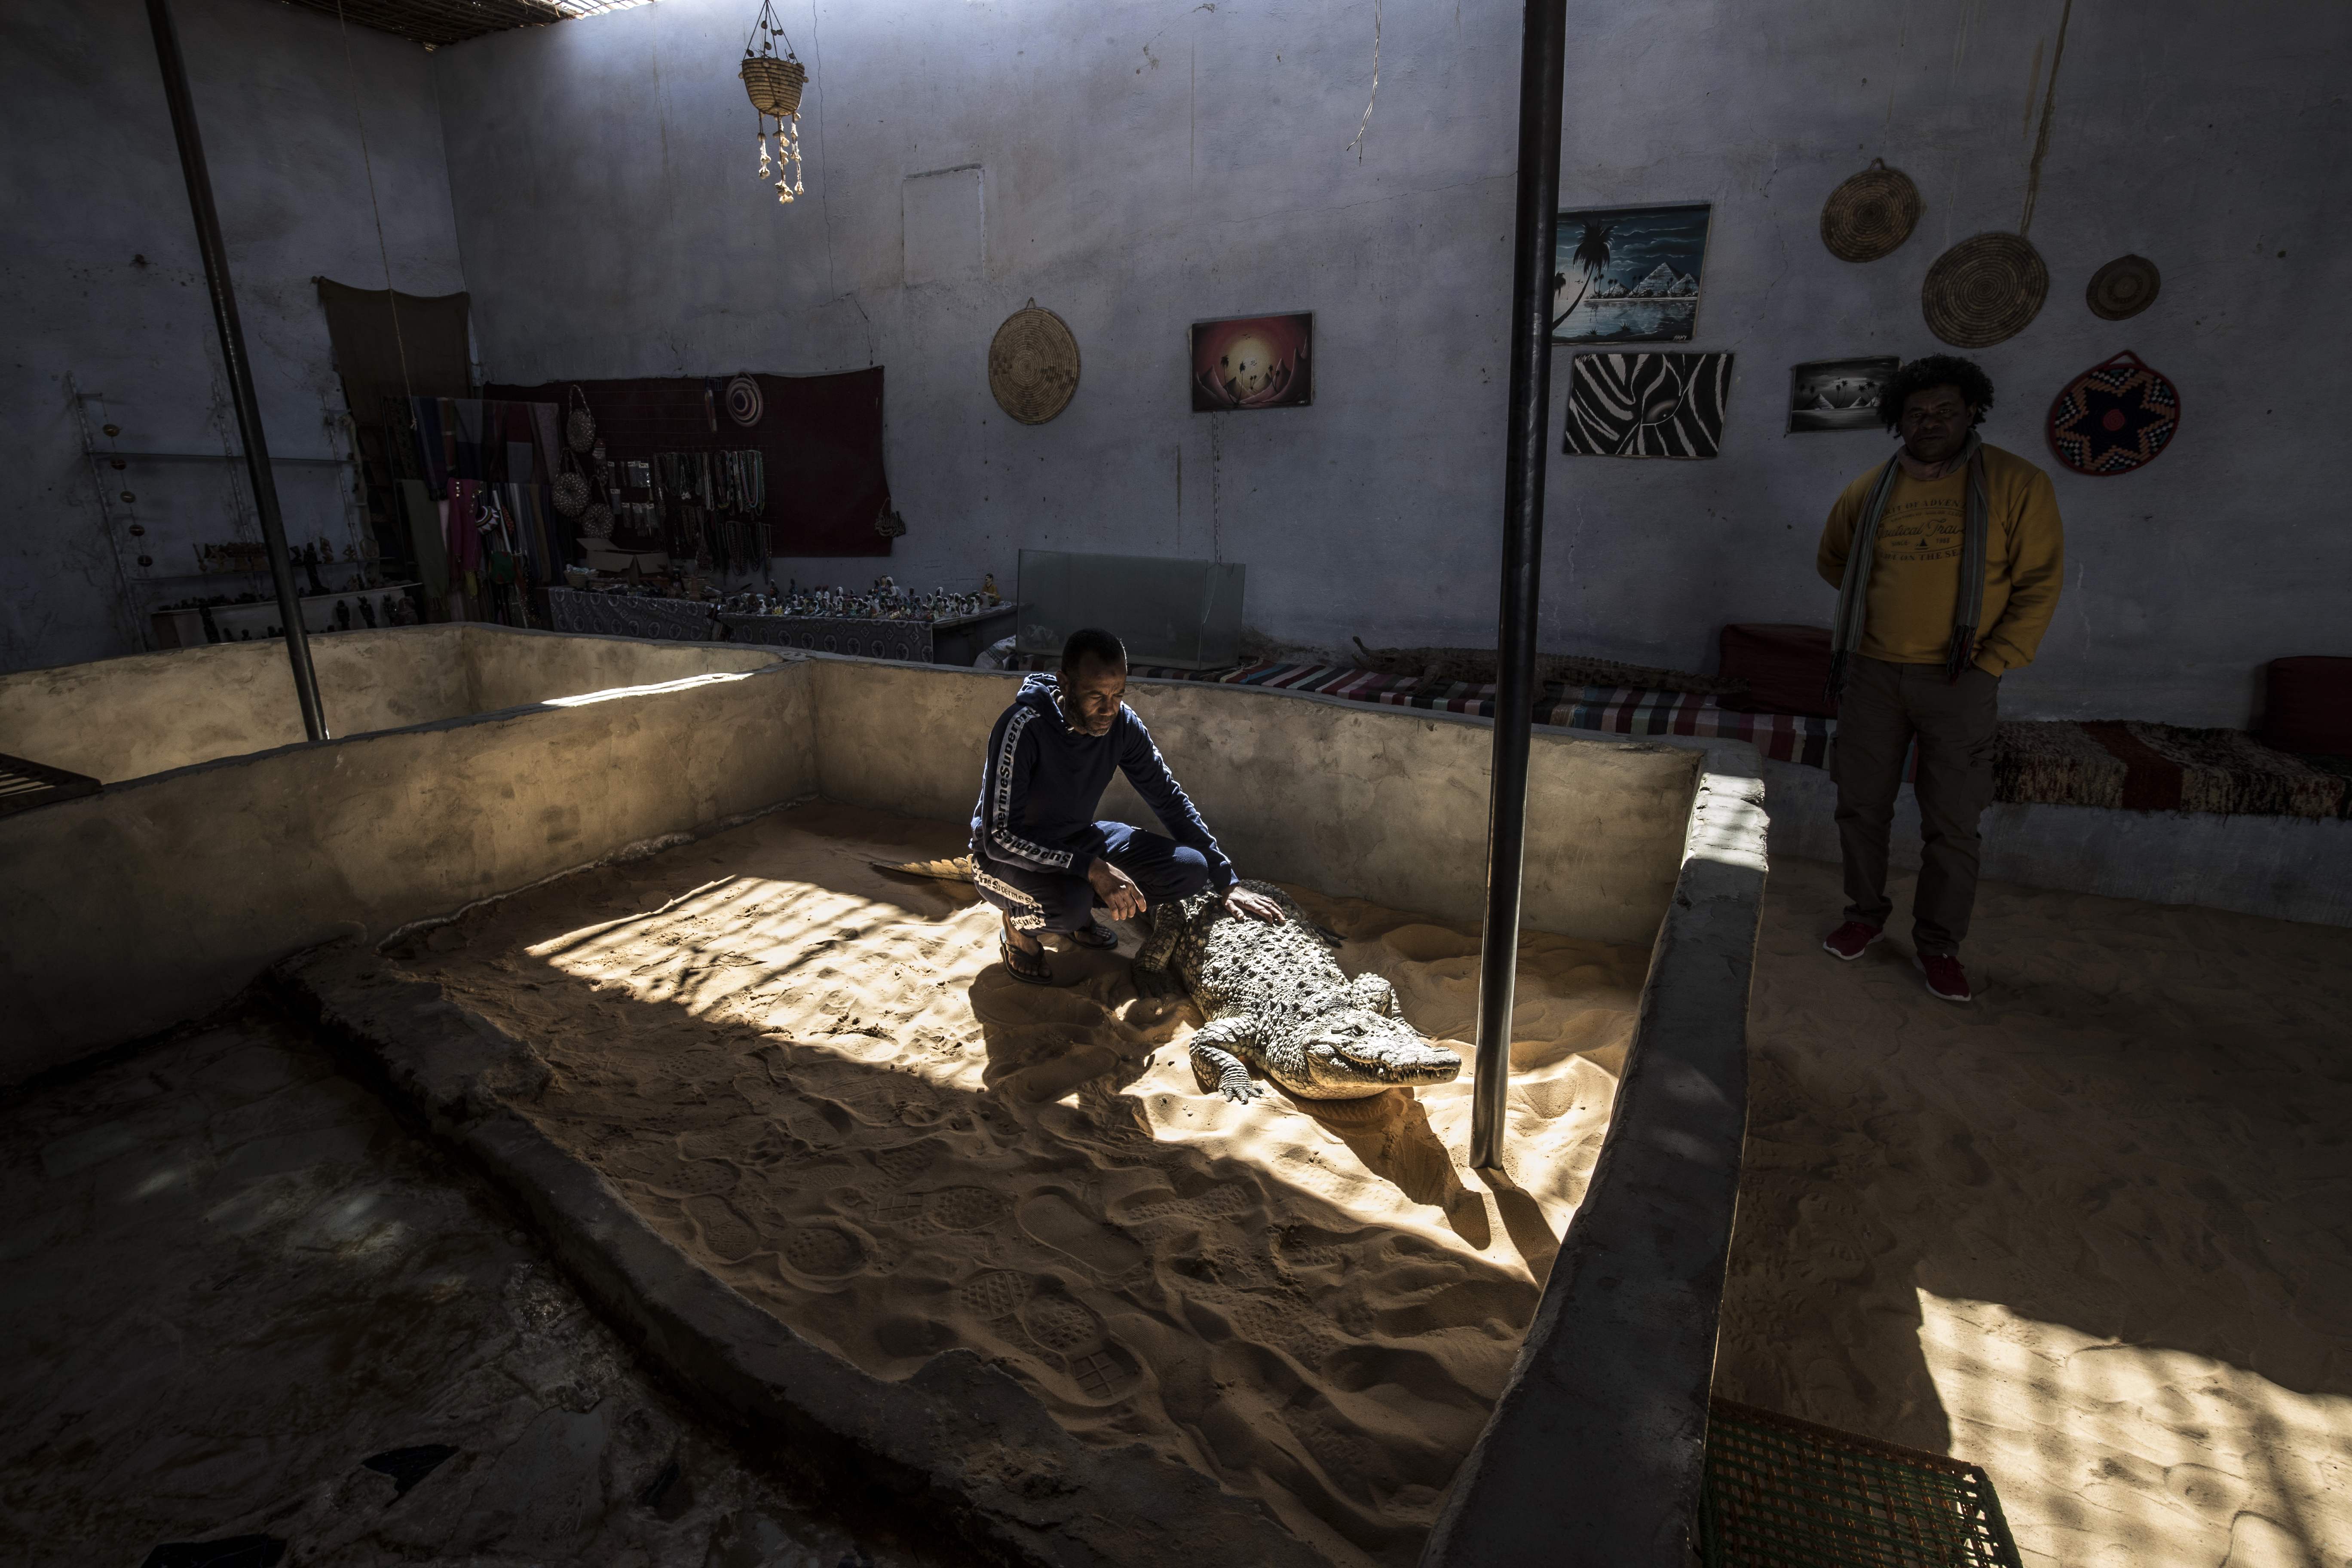 Mamdouh Hassan shows a crocodile to visitors at his house in the Nubian village of Gharb Soheil